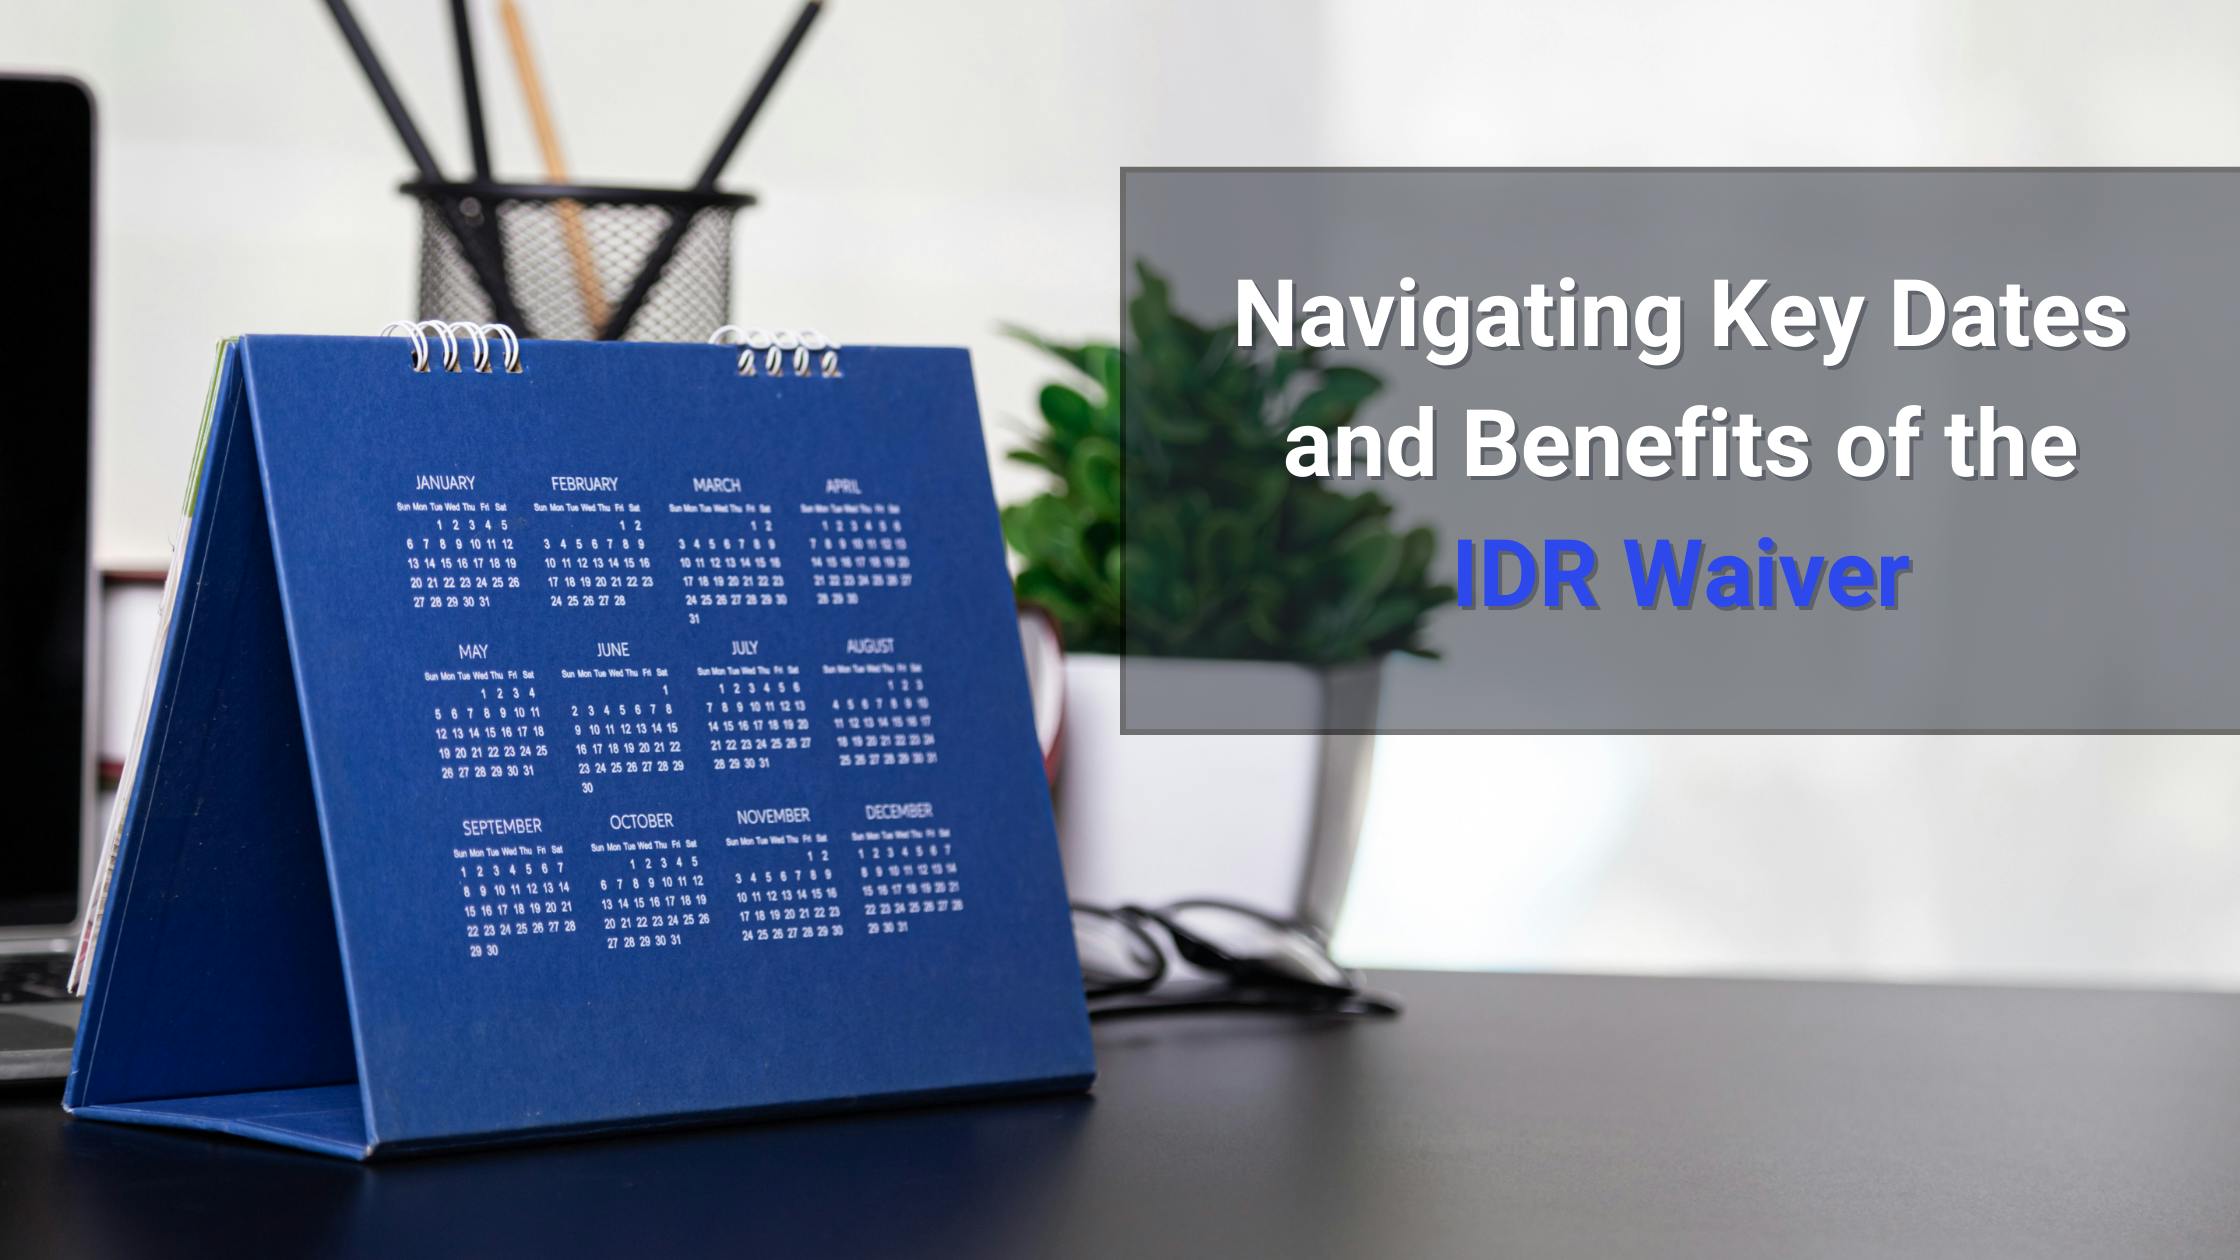 Navigating Key Dates and Benefits of the IDR Waiver